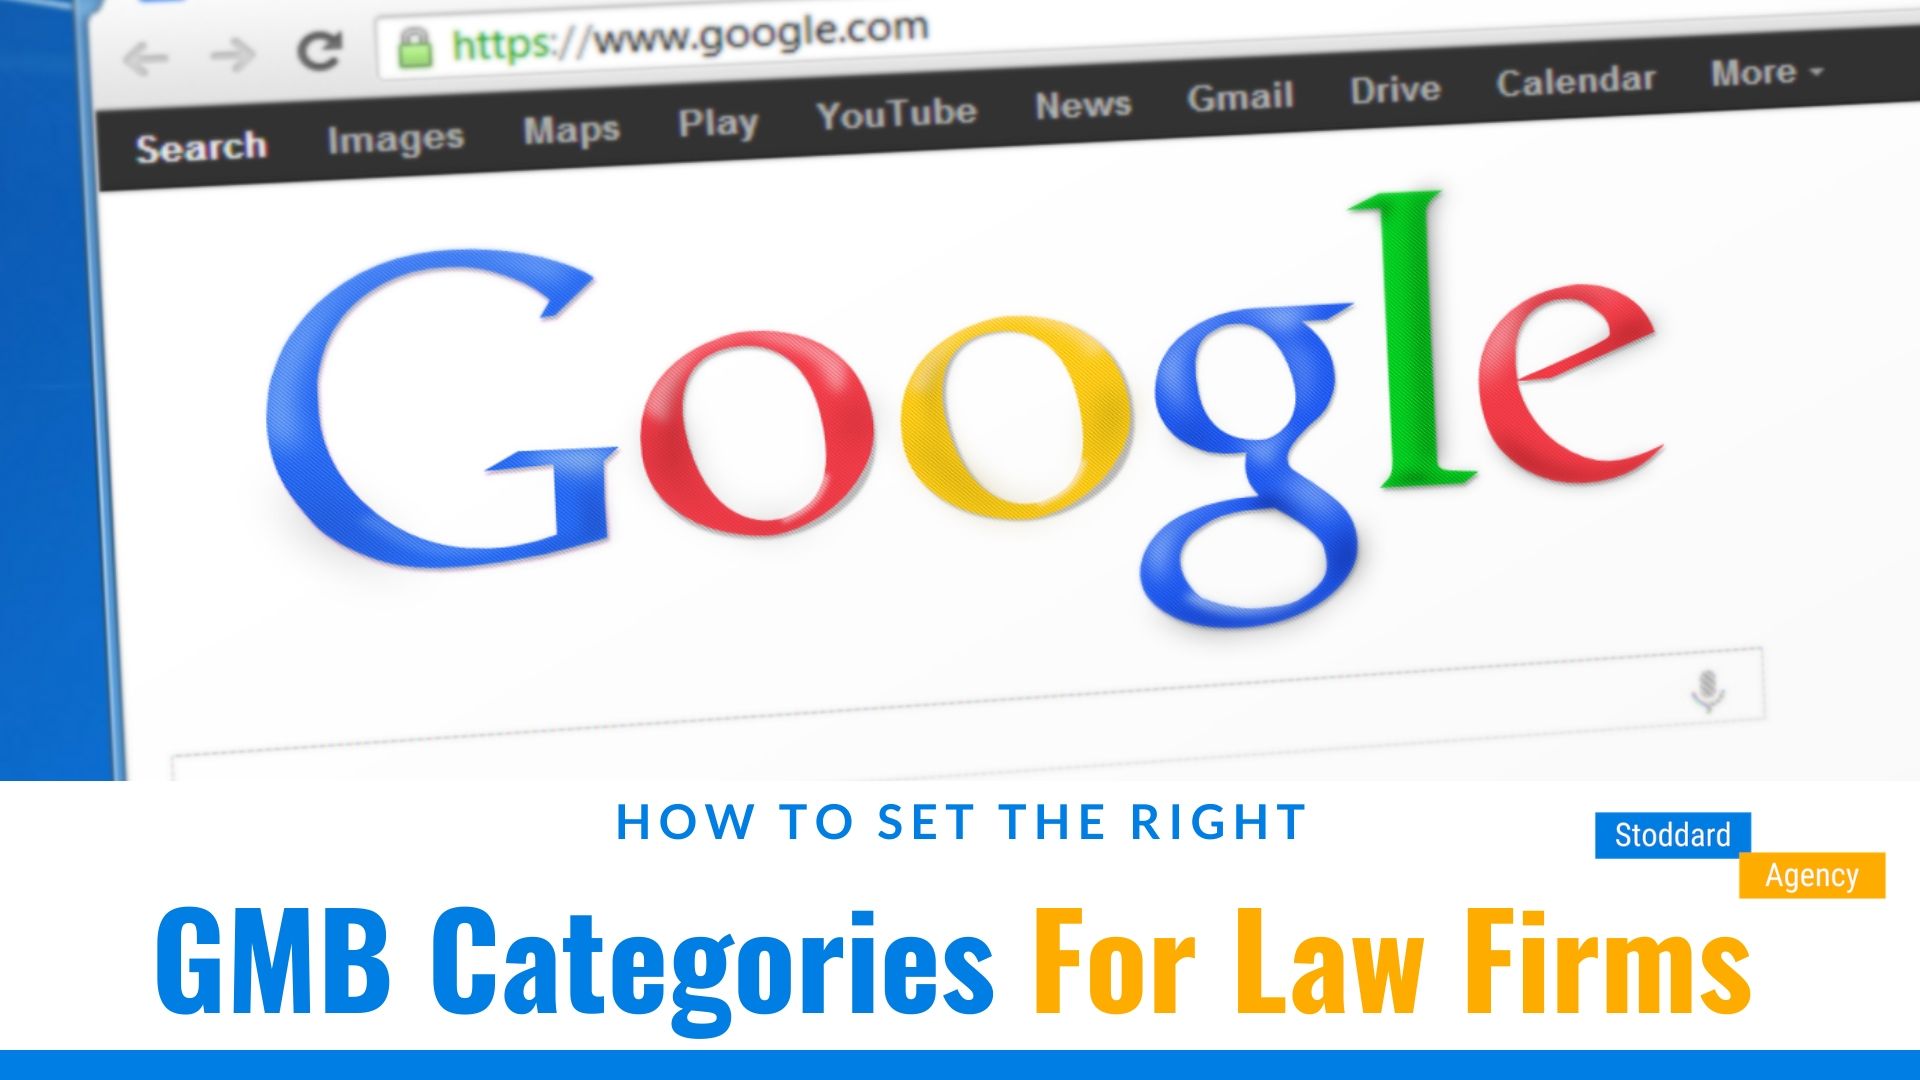 How To Set the Right GMB Categories Law Firms